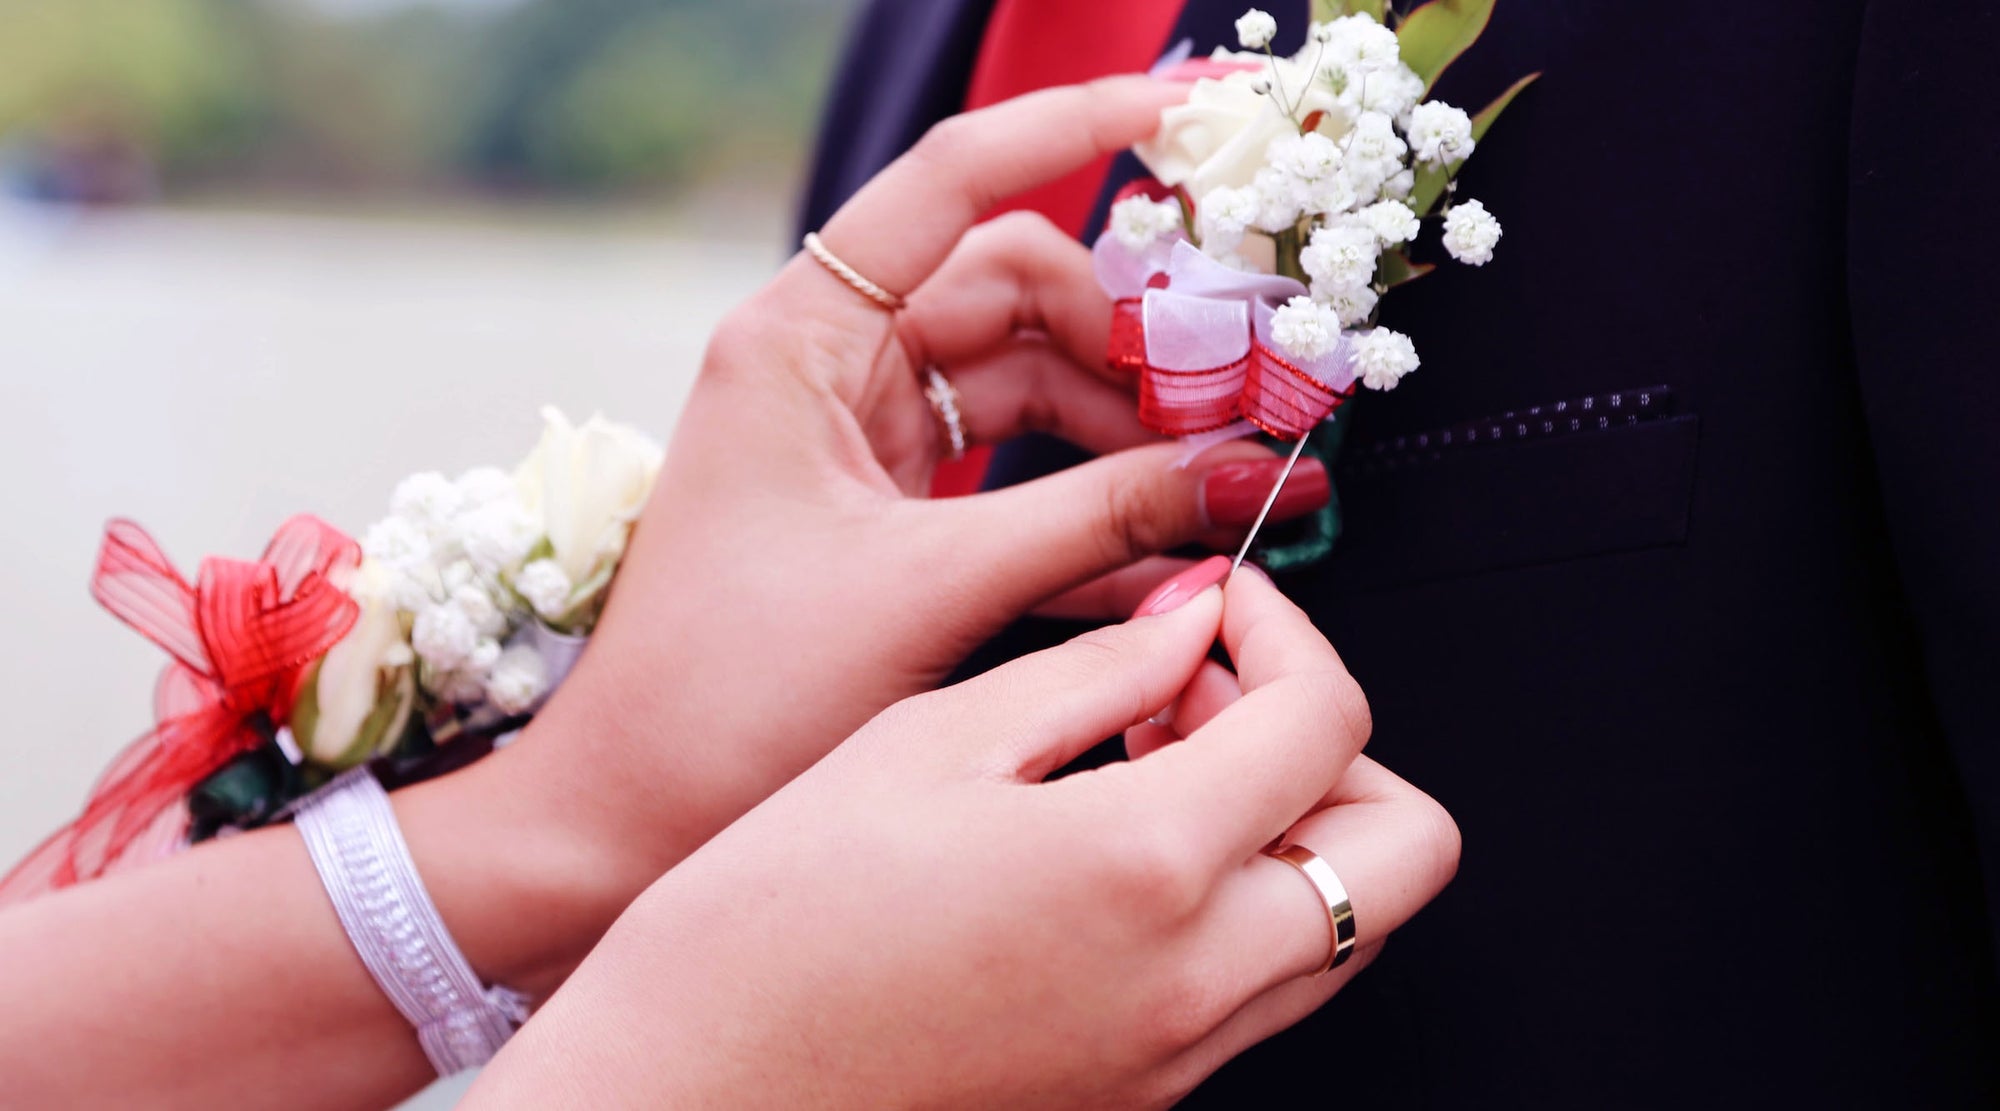 young lady wearing fashion rings attaching a flower pin to her prom date